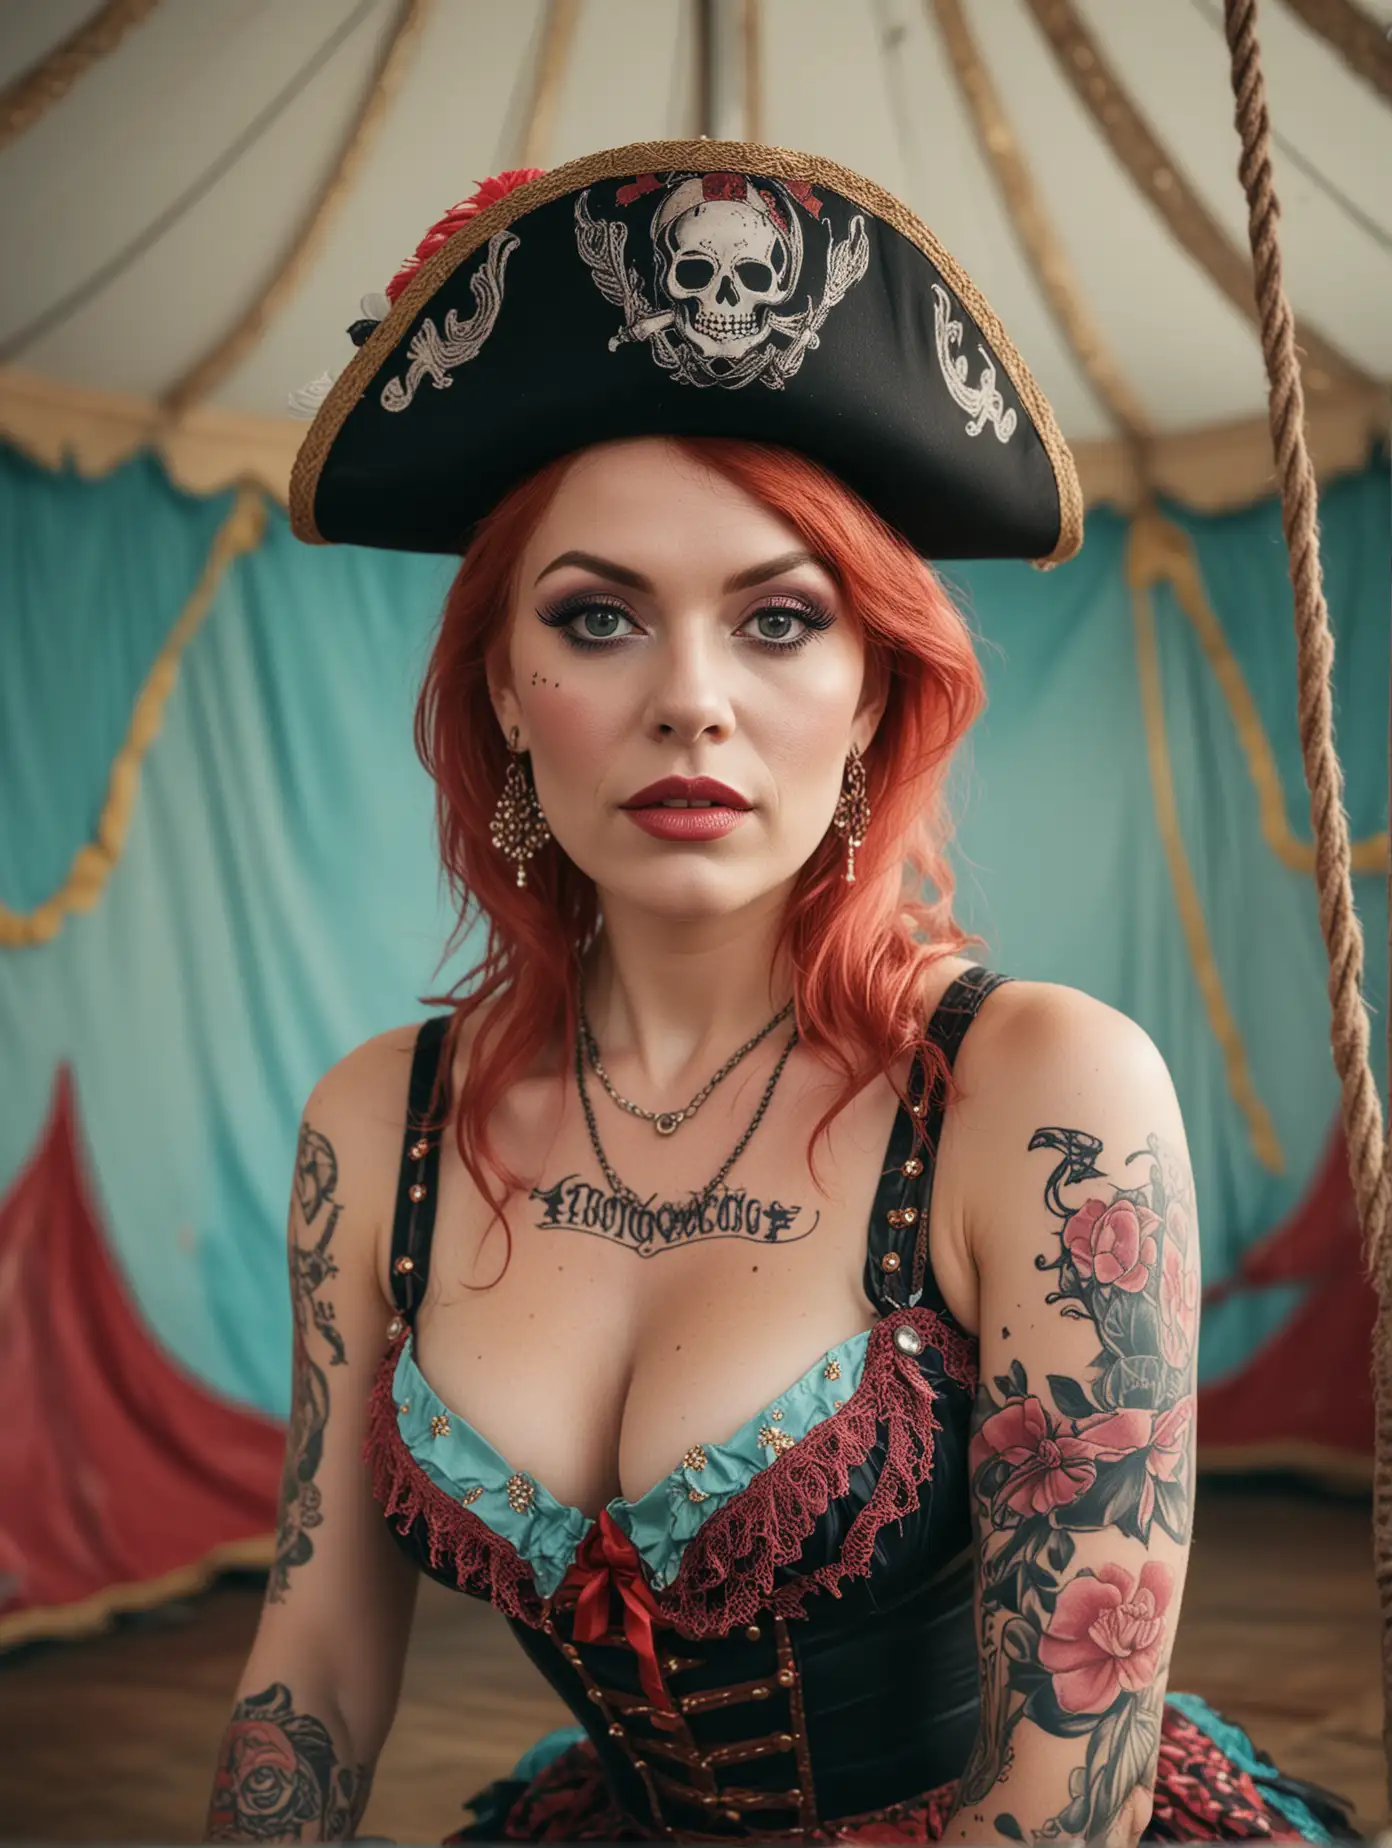 close up portrait, highly detailed, circus, in the style of whimsical yet eerie symbolism, American 1960's circus, light cyan and pink palette, close up portraiture, mature well built busty, Columbian female acrobat with long red hair, wearing a pirate themed outfit, pirate hat, leotard and tutu, covered in tattoos, sitting on a trapeze swing, inside a circus tent, nature-inspired pieces, circus costumes, ultra details